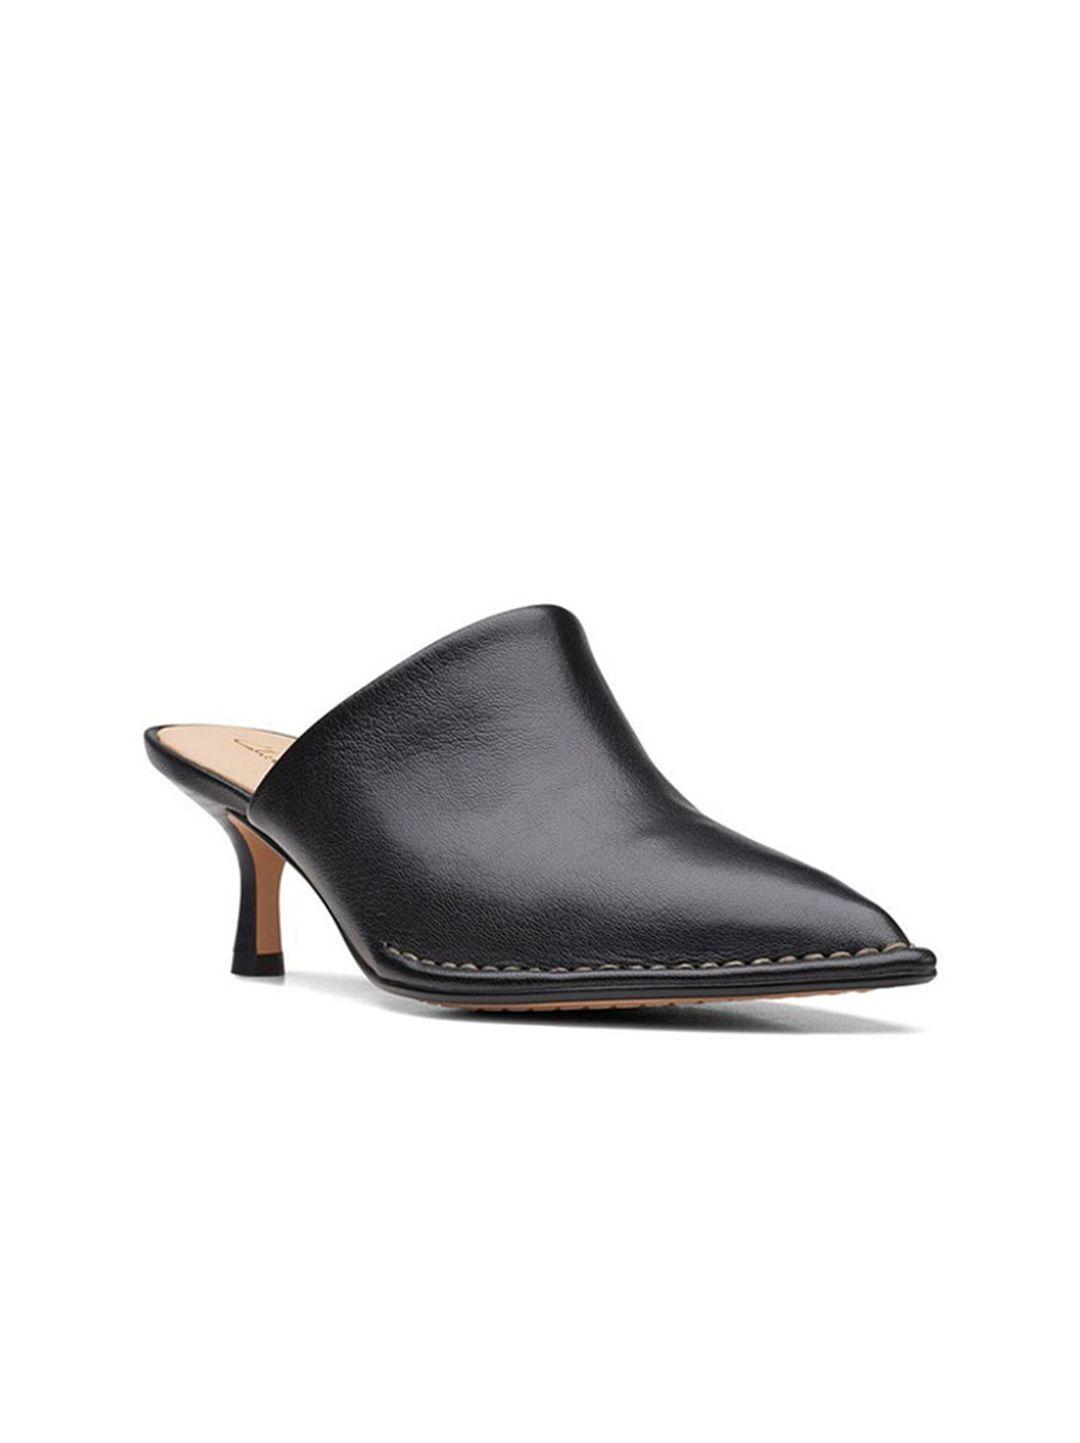 clarks-open-back-leather-stiletto-mules